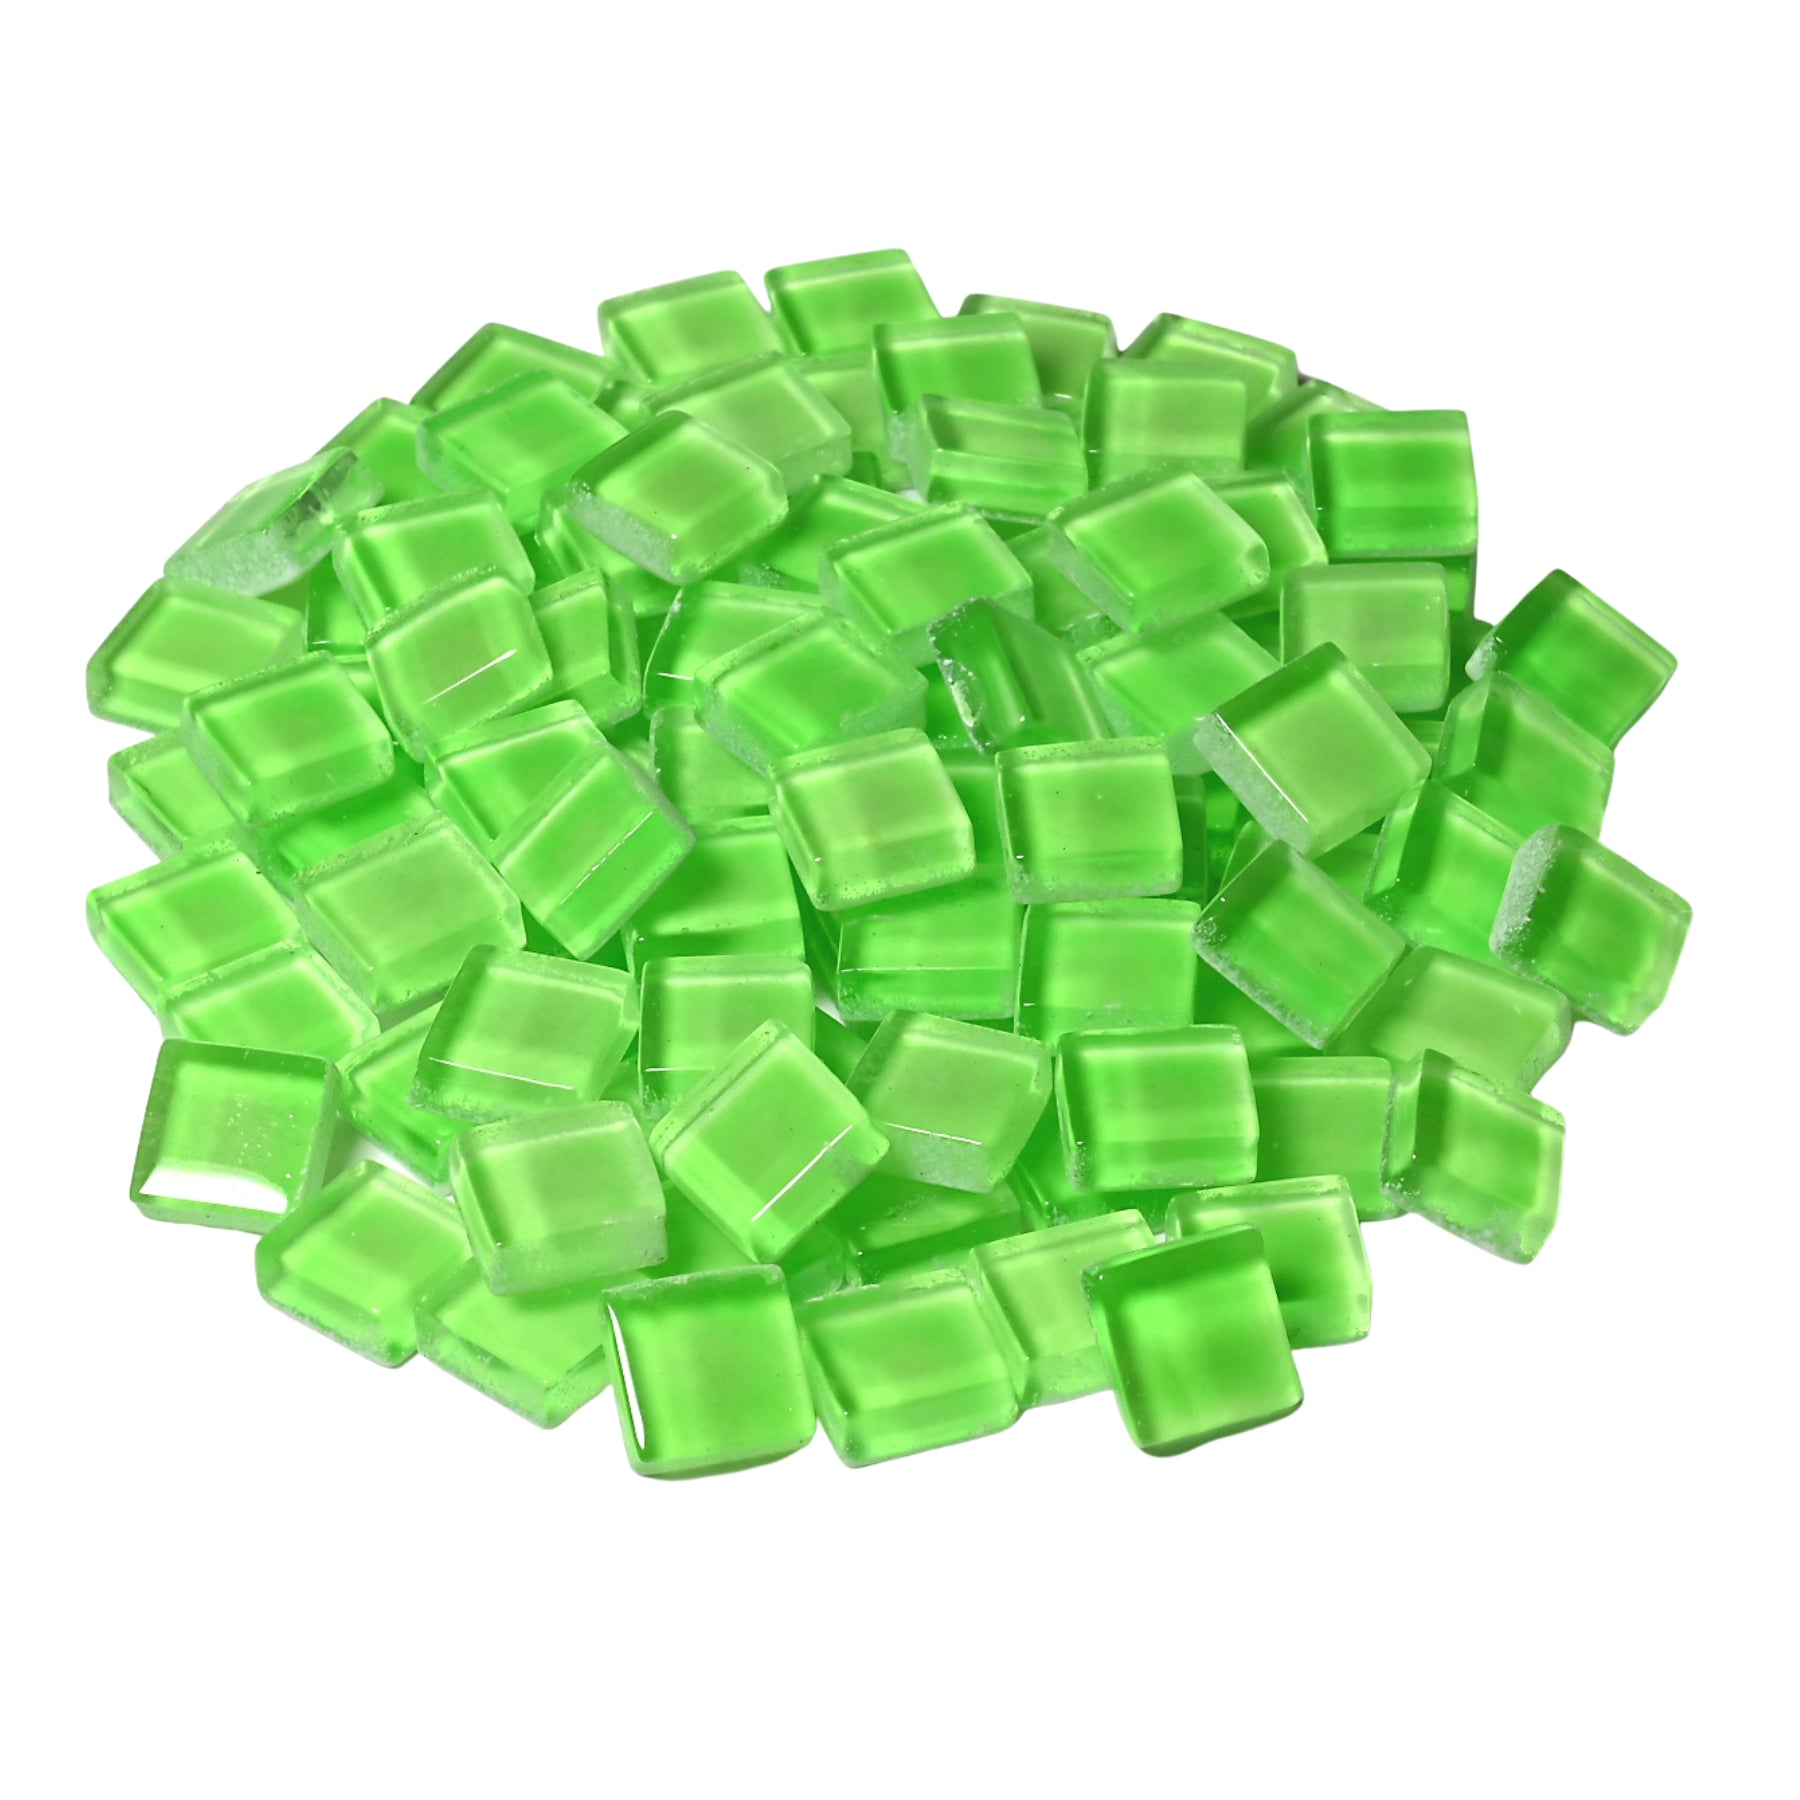 Soft Glass Squares - Green Glow In The Dark